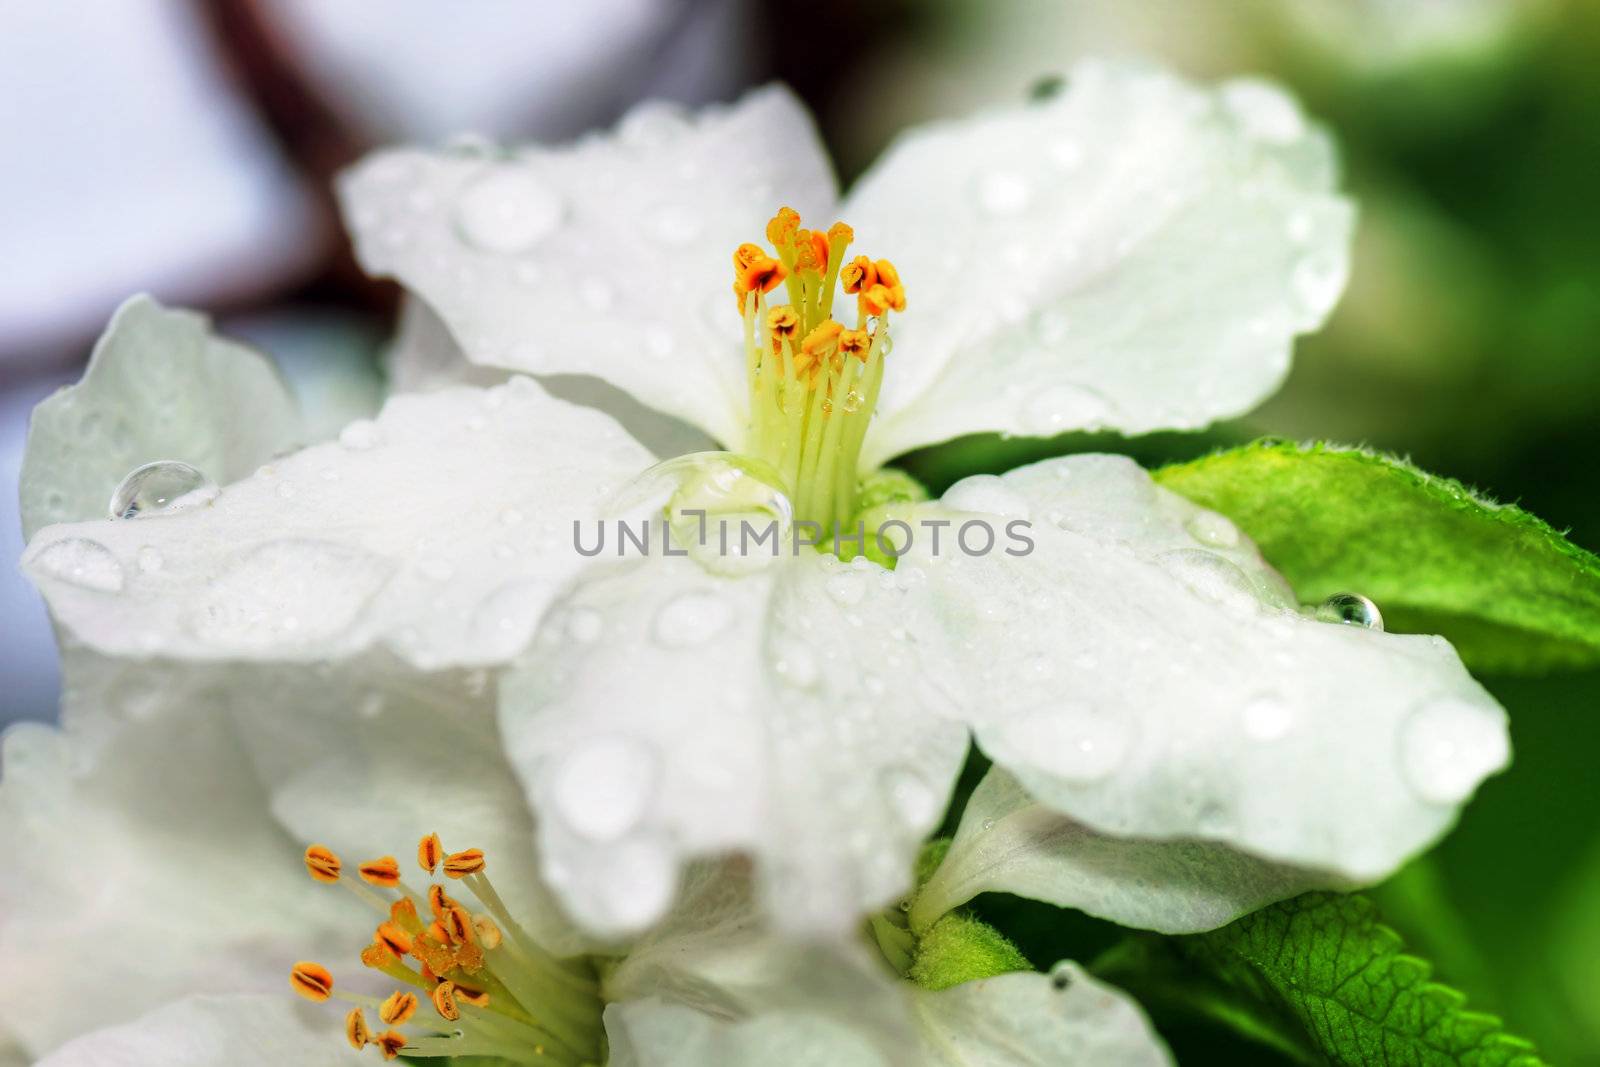 Brautiful hdr of apple tree flower after the rain, with great details and many water drops, perfect spring or floral background.